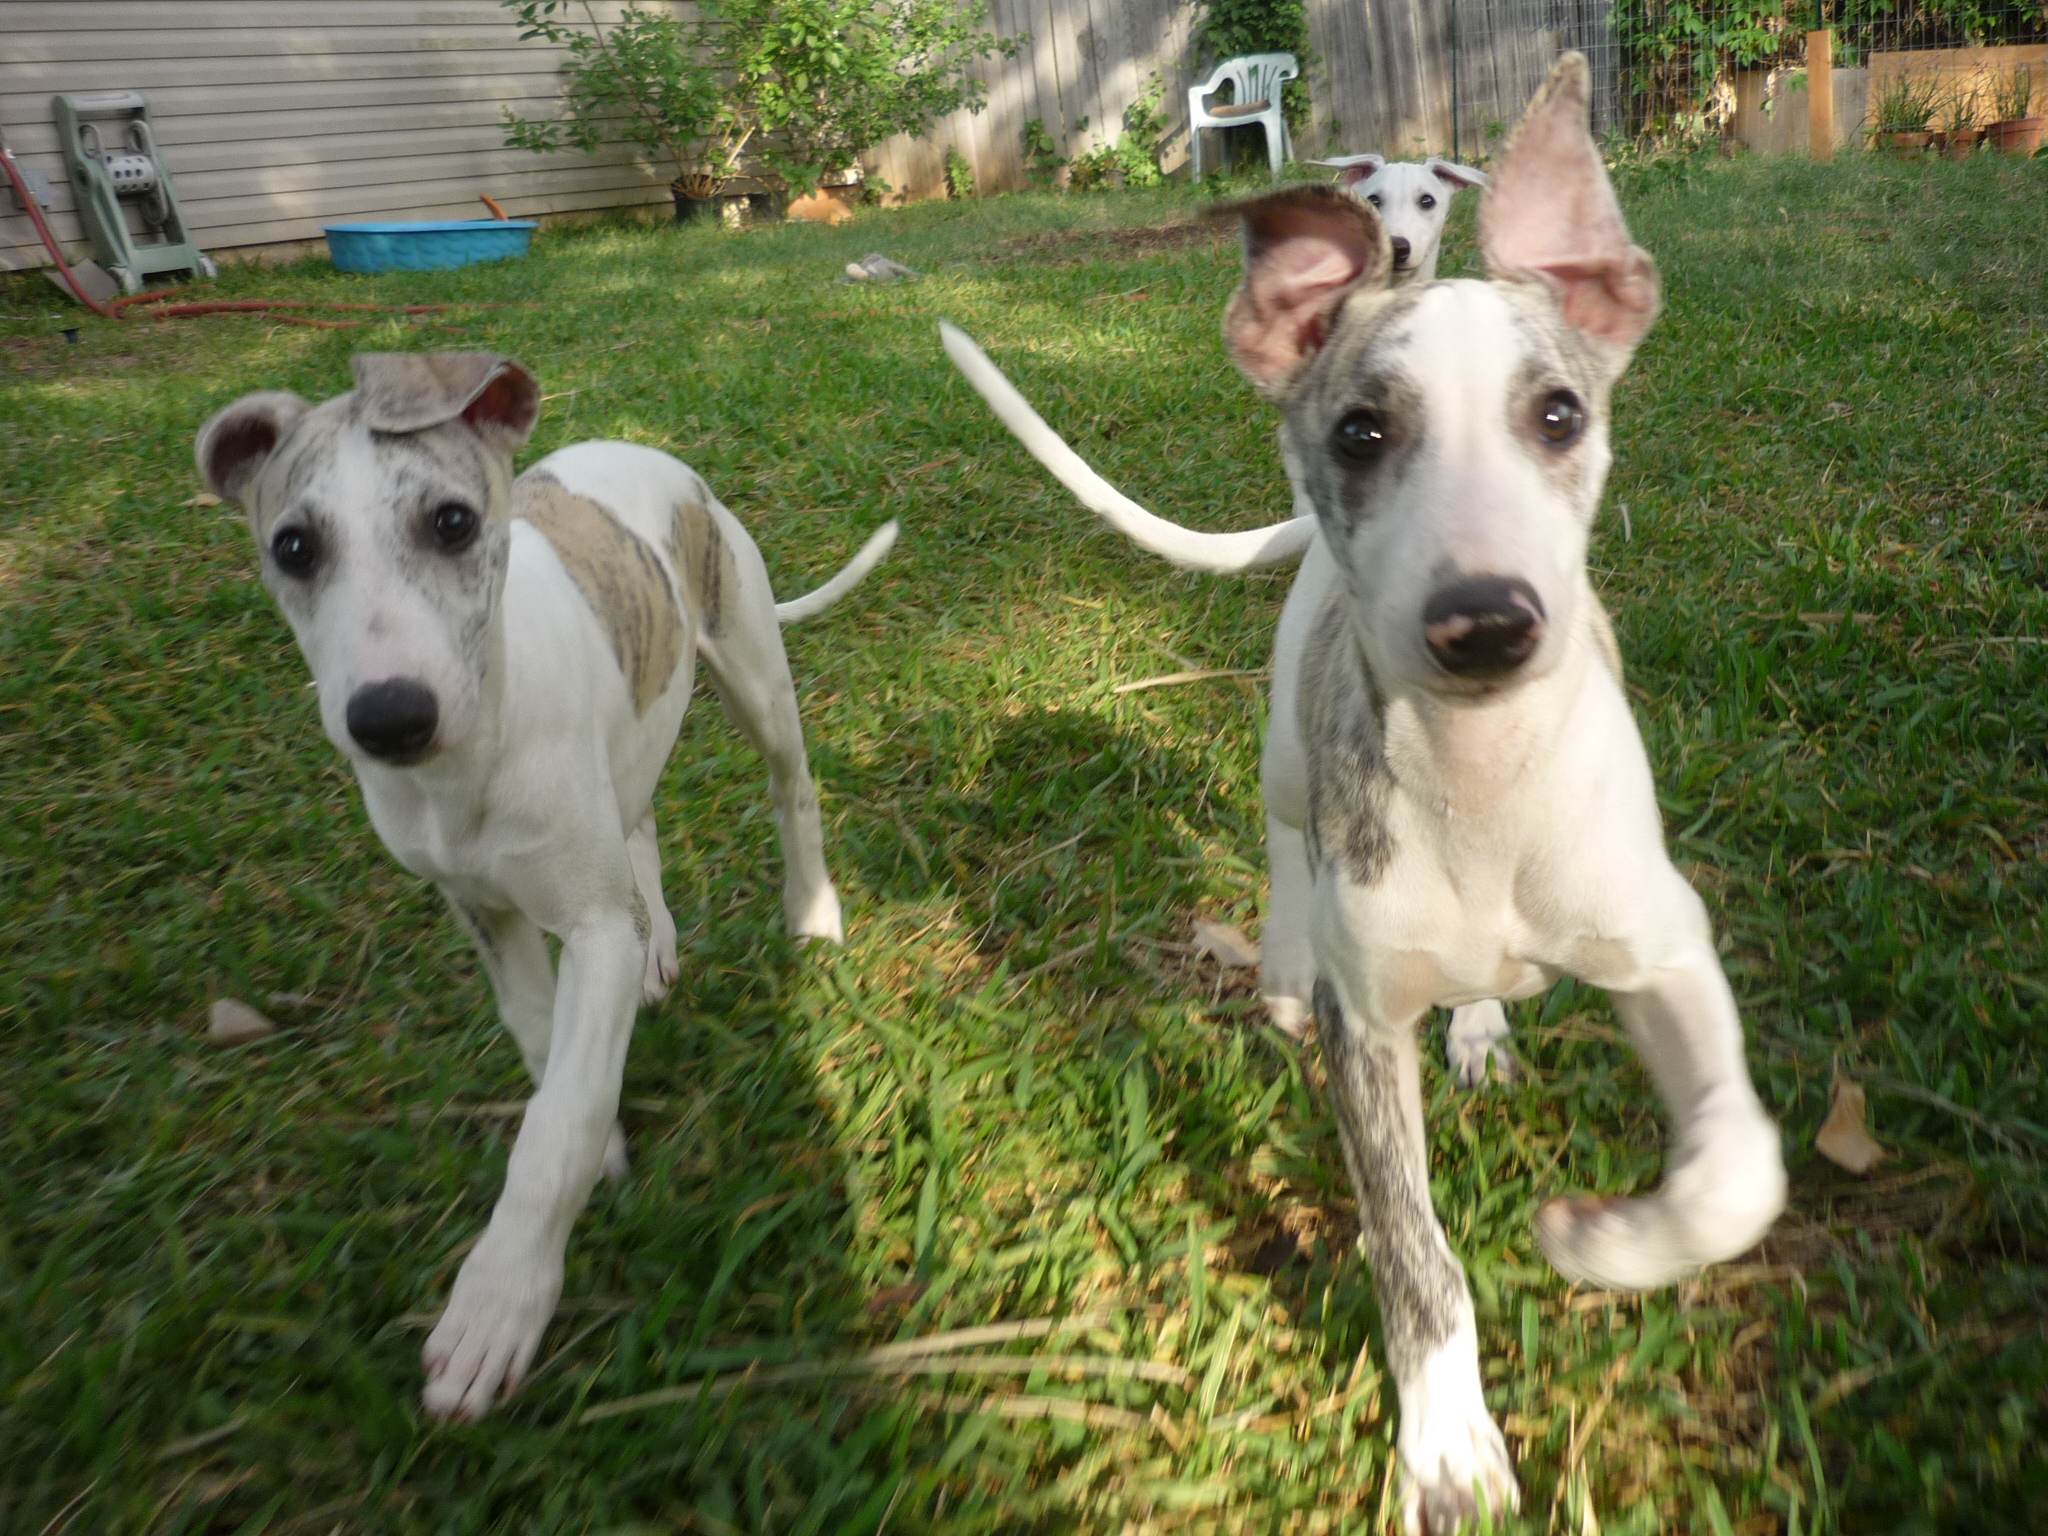 two whippet dogs in a yard on the grass